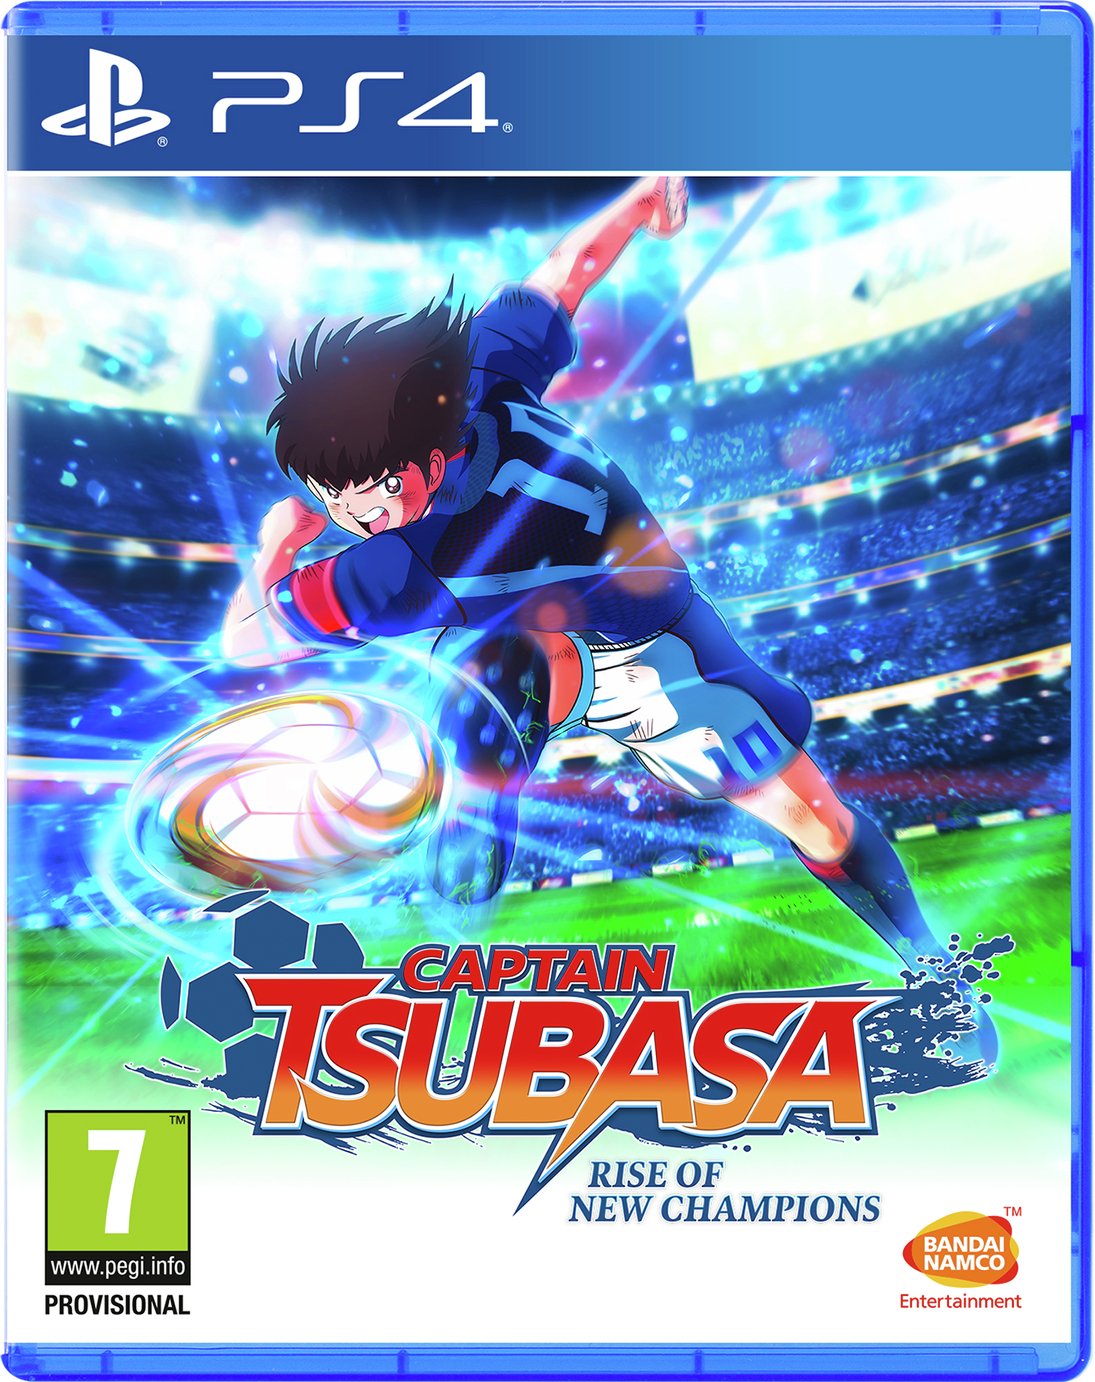 Captain Tsubasa: Rise of New Champions PS4 Game Pre-Order Review